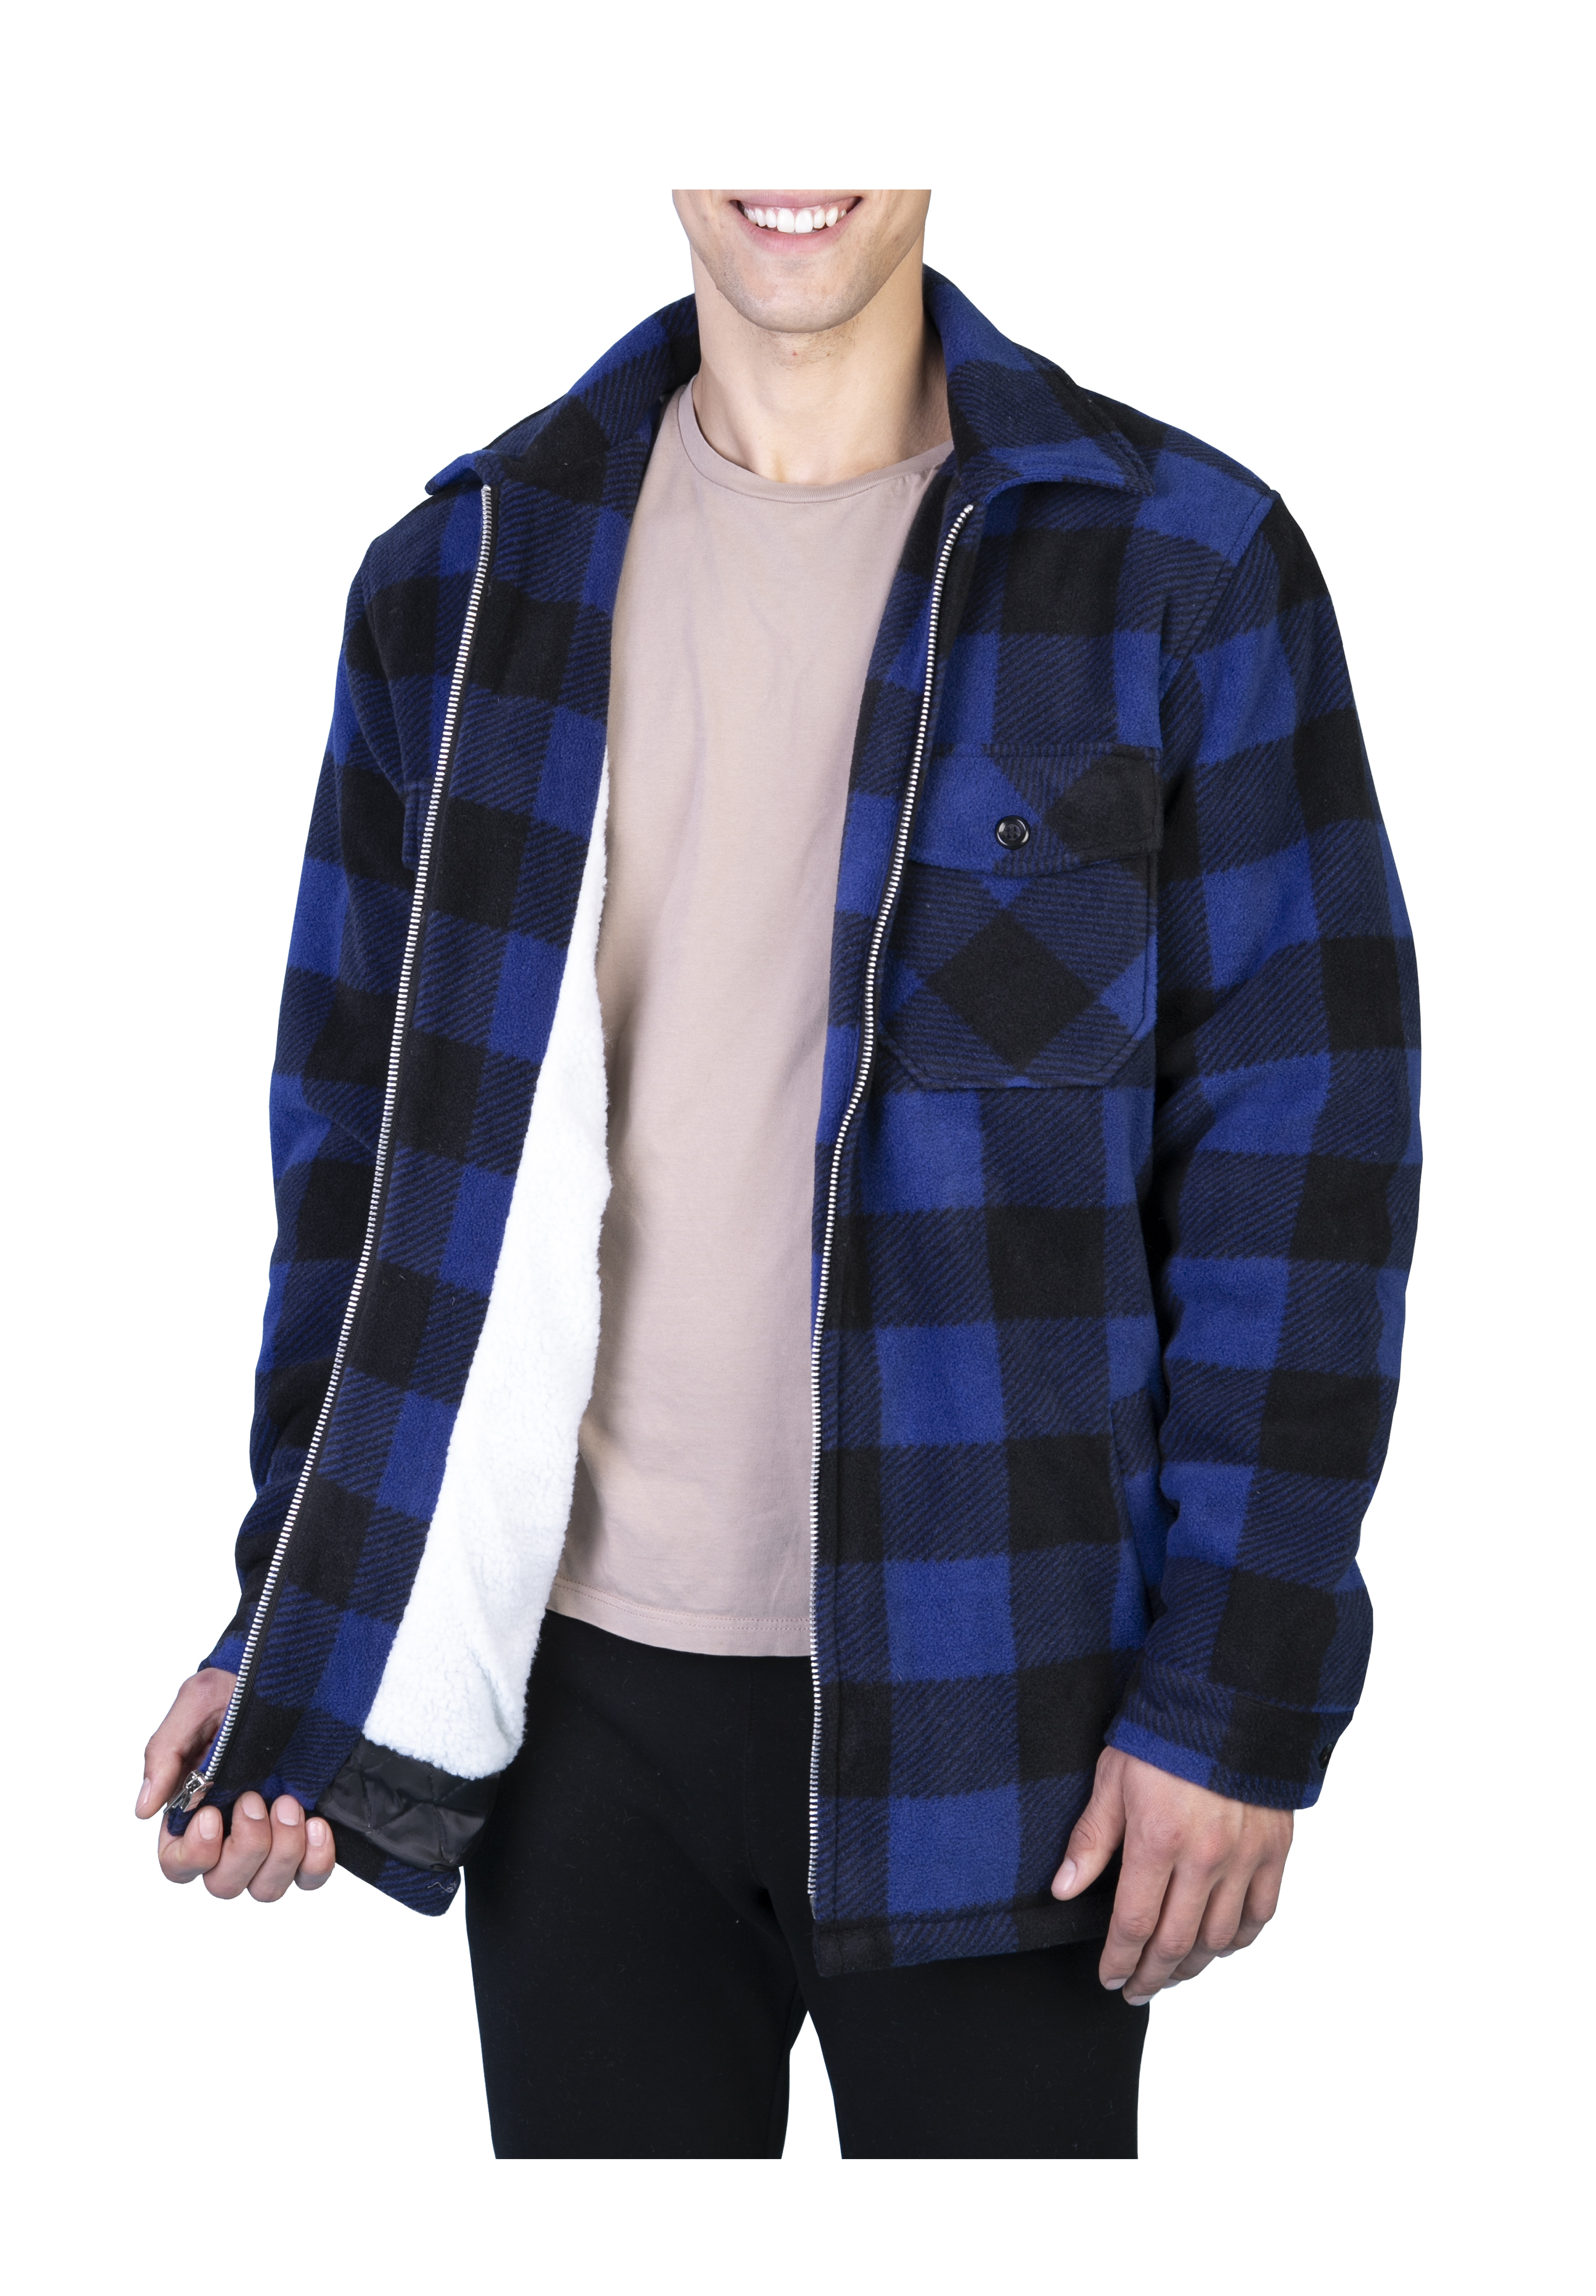 BISS Small Inventory Management Services Poly/Cotton Plaid Posey 3350S Sleeved Jacket with Zipper 